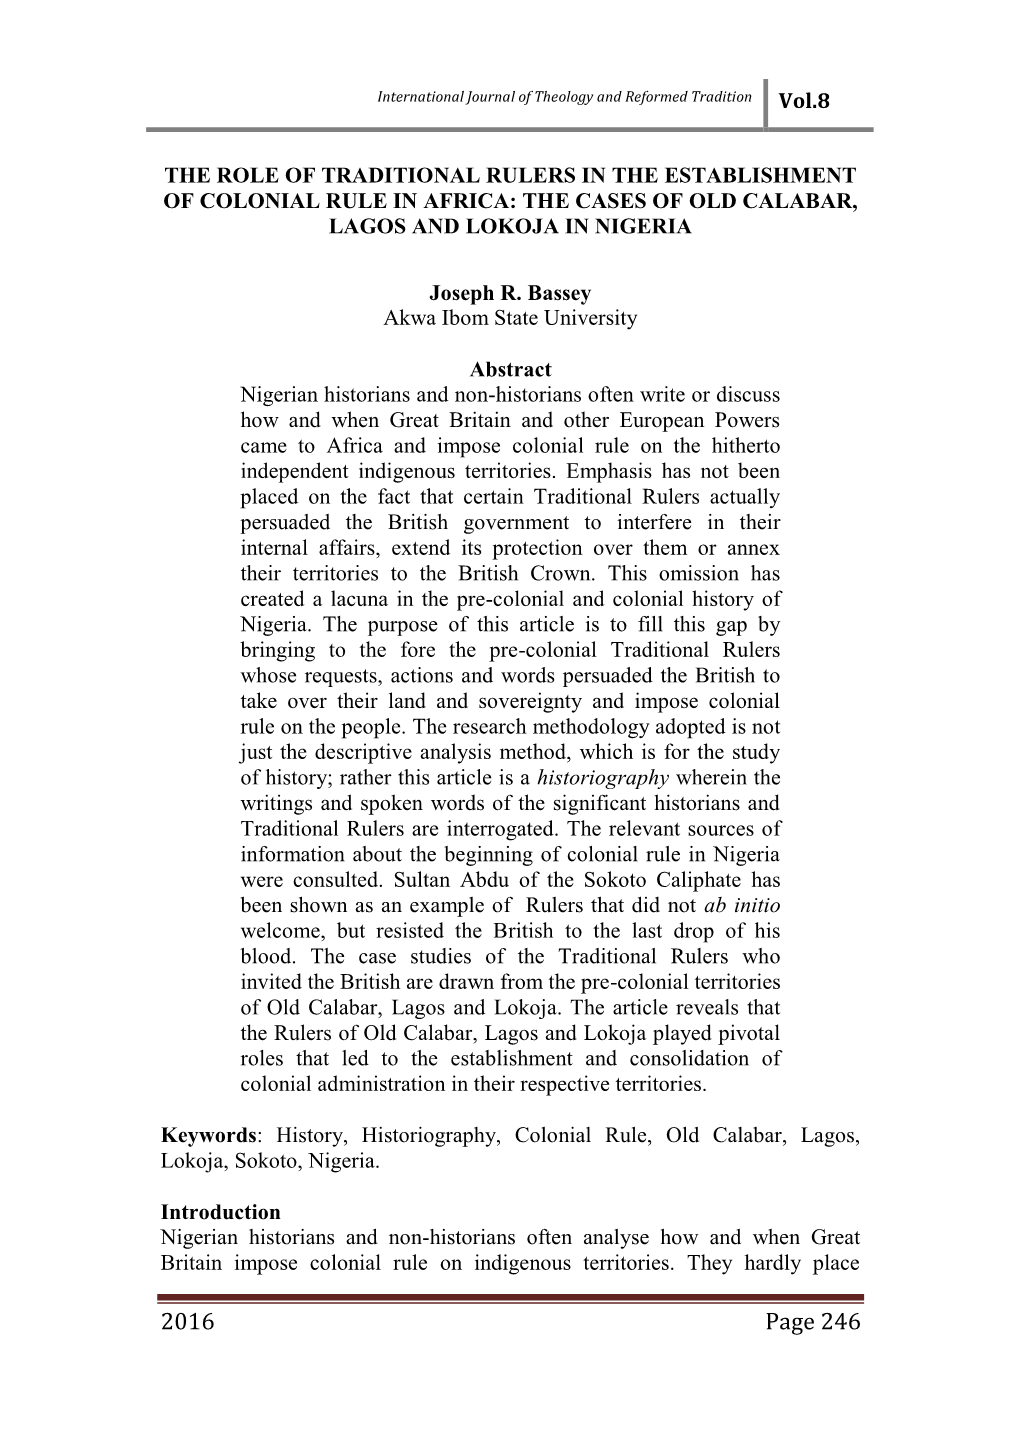 The Role of Traditional Rulers in the Establishment of Colonial Rule in Africa: the Cases of Old Calabar, Lagos and Lokoja in Nigeria